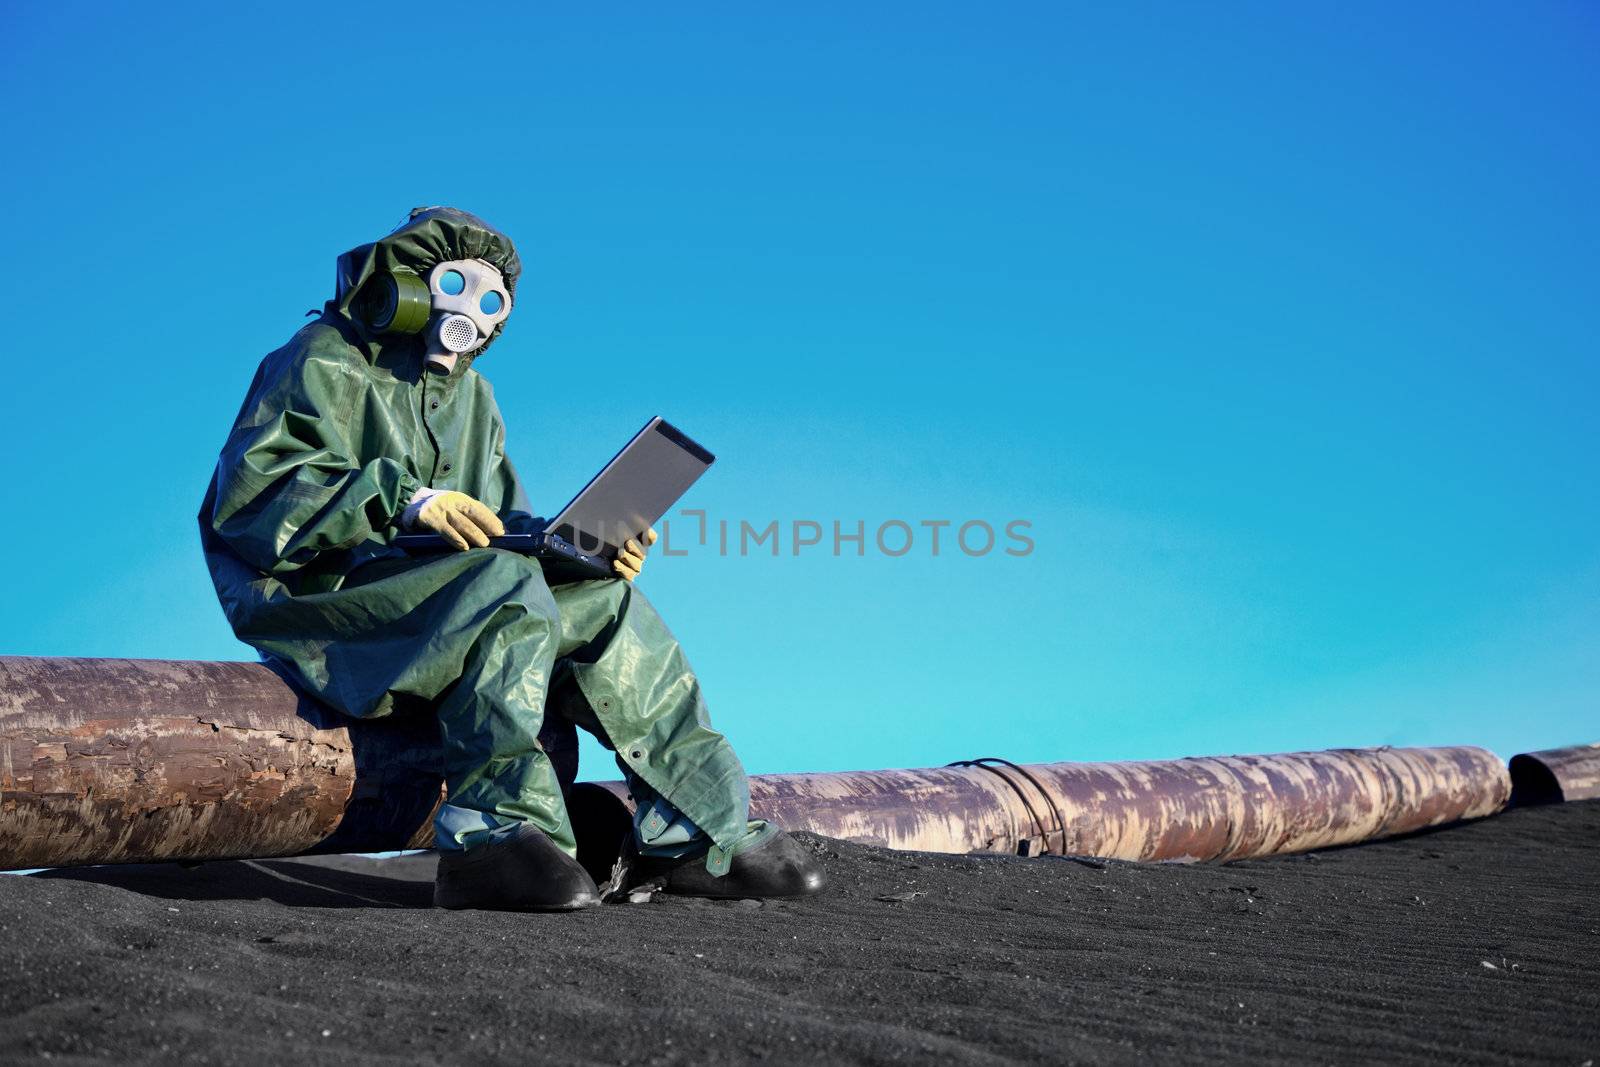 Scientist with a laptop on chemically contaminated area by pzaxe